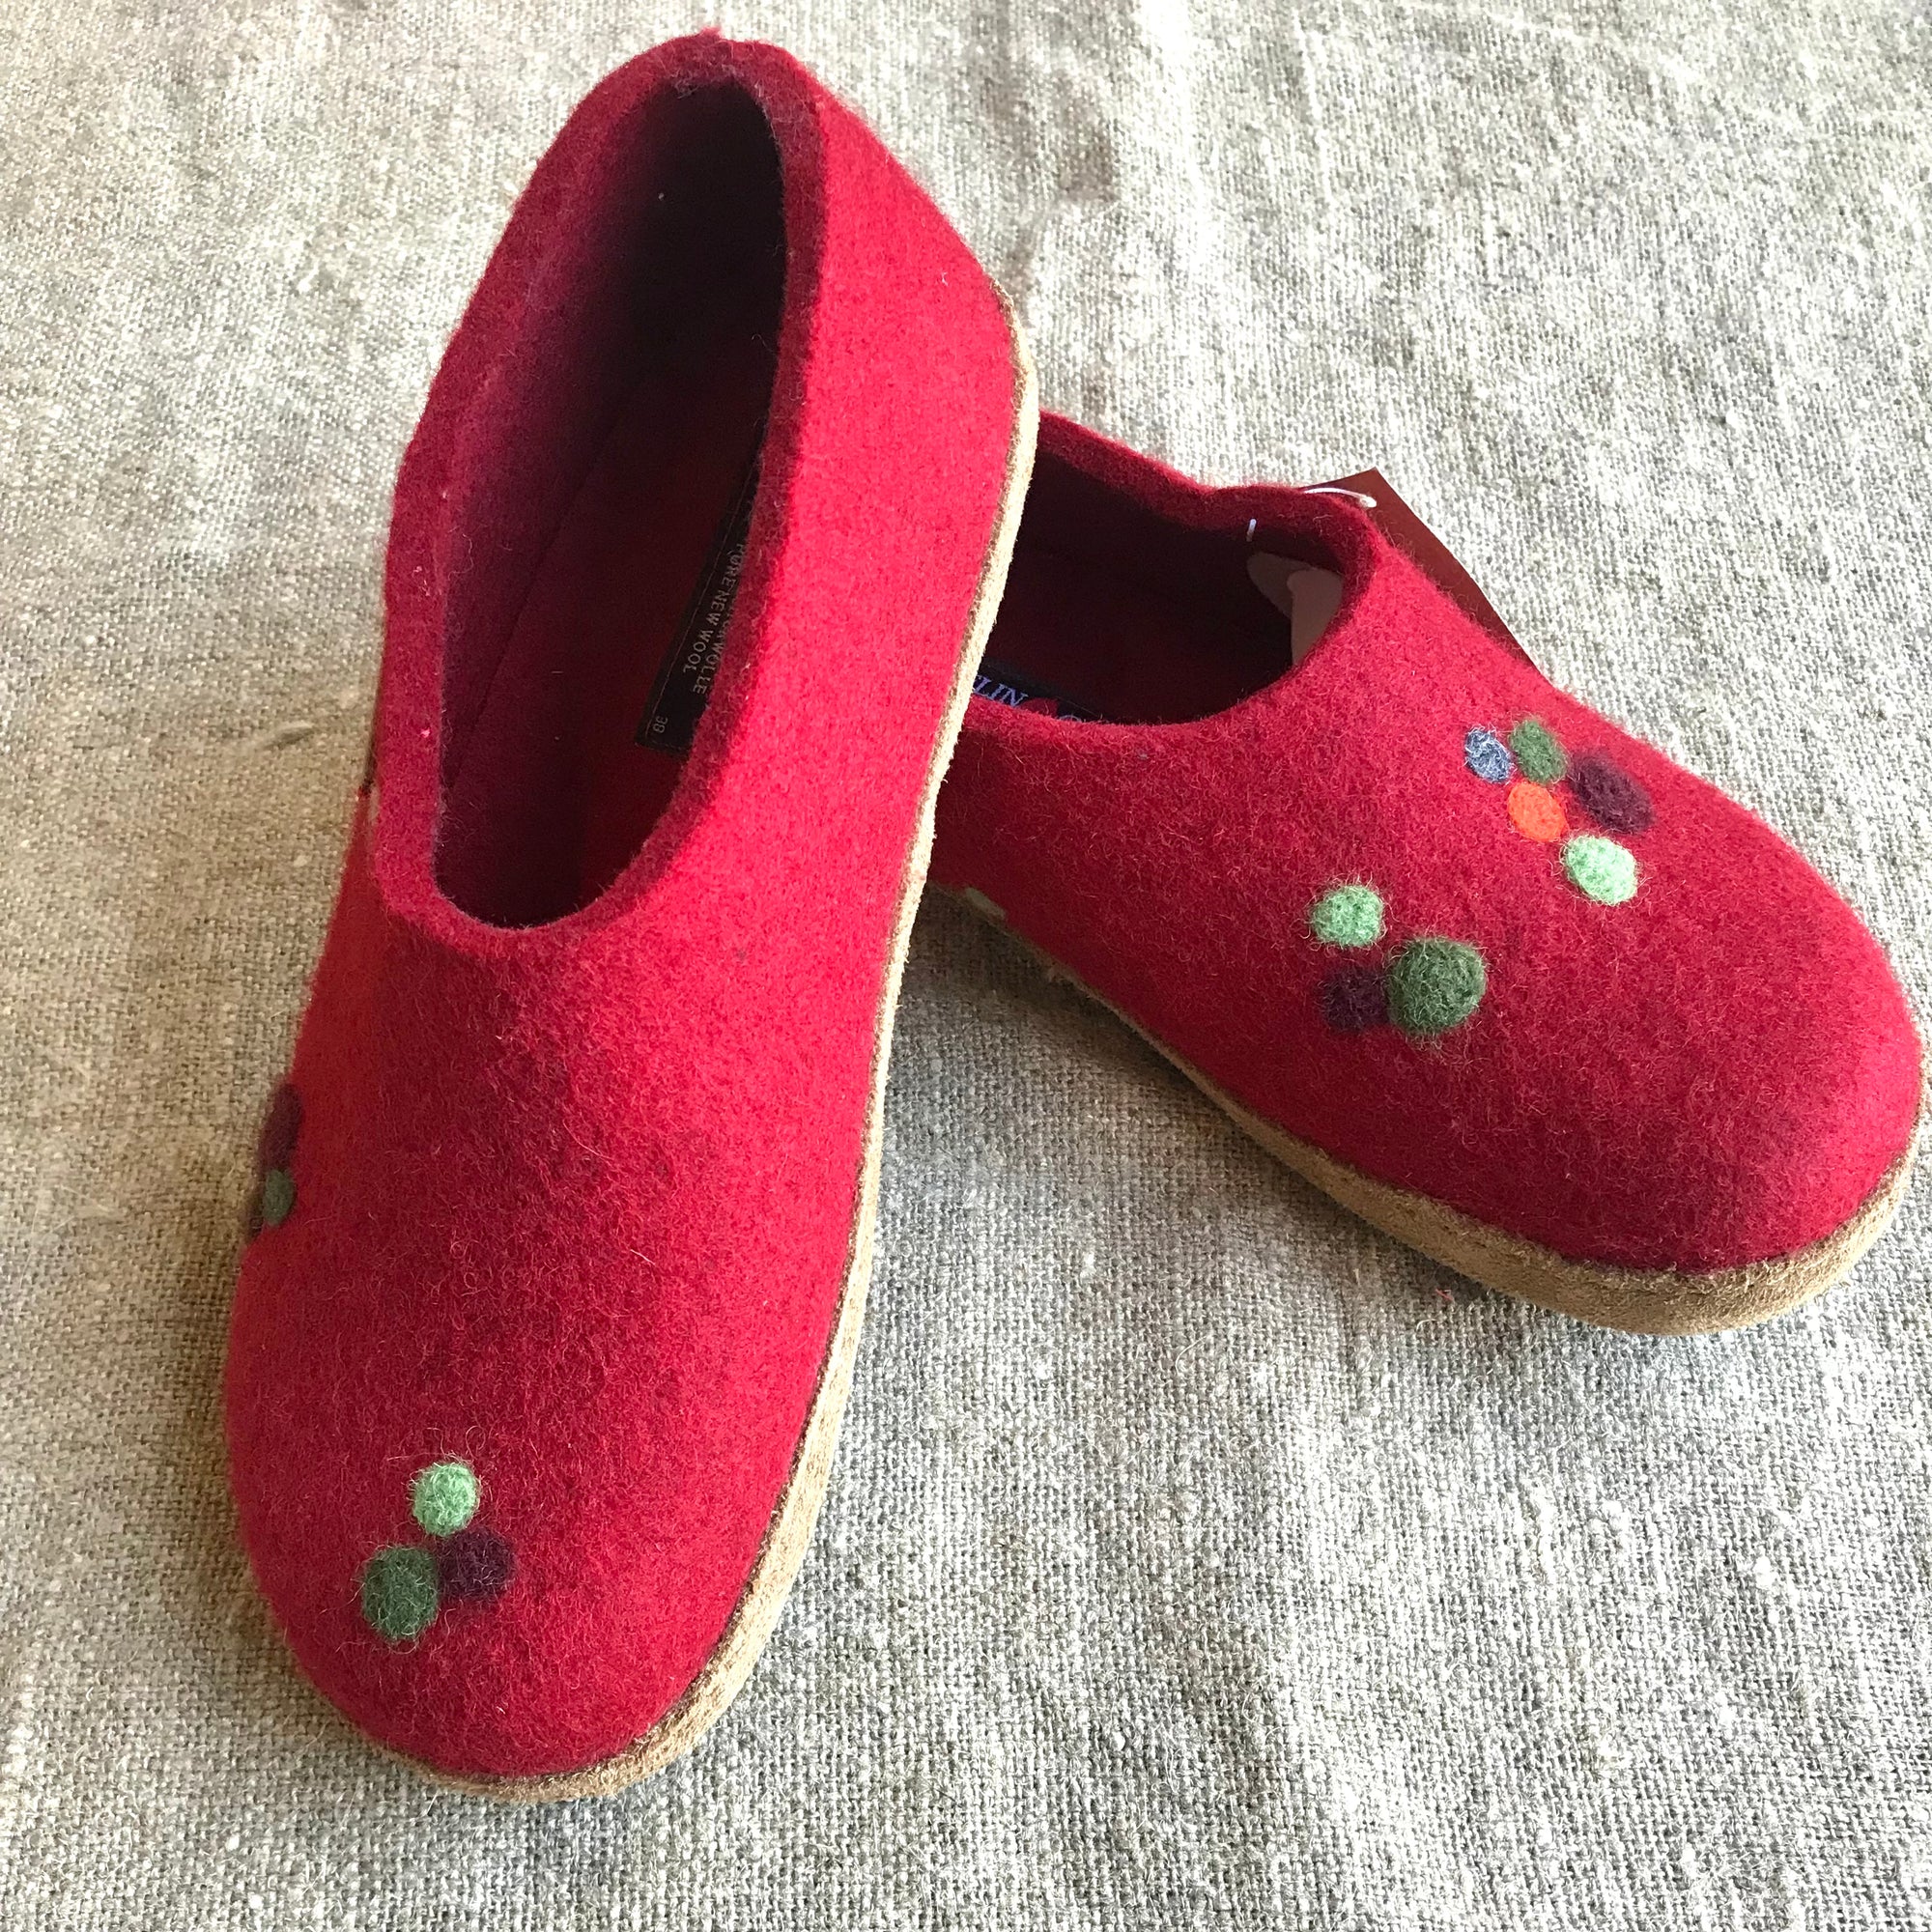 Toffel - Unisex Wool Felt Slippers with Leather Sole - Rubin (EU38) - NEW/MENDED